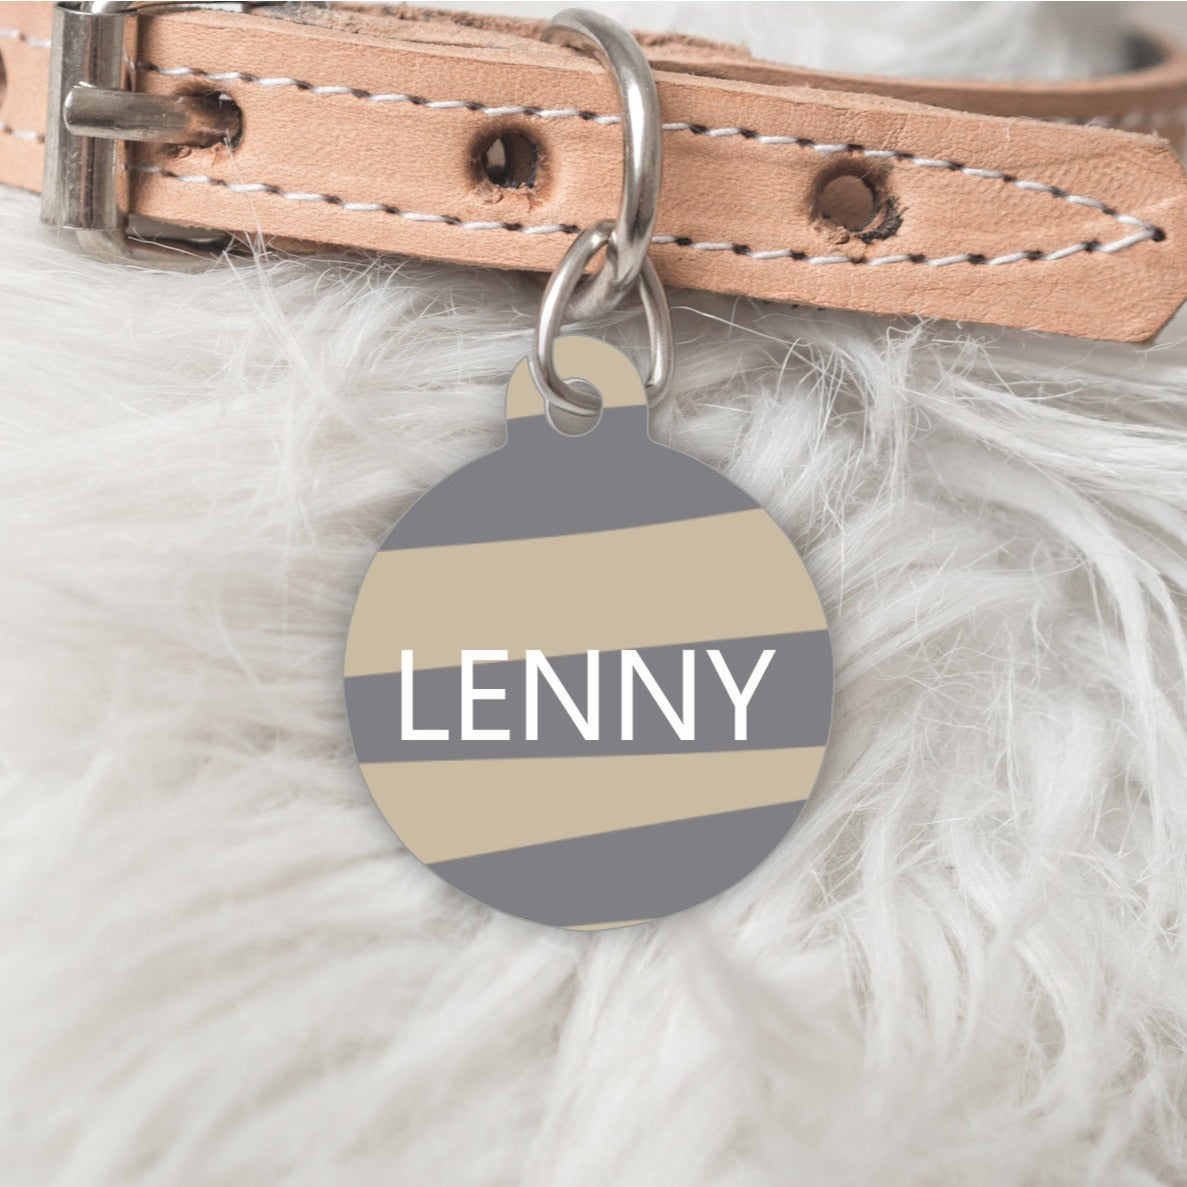 In The Wild- Personalised Pet dog or cat ID Tag